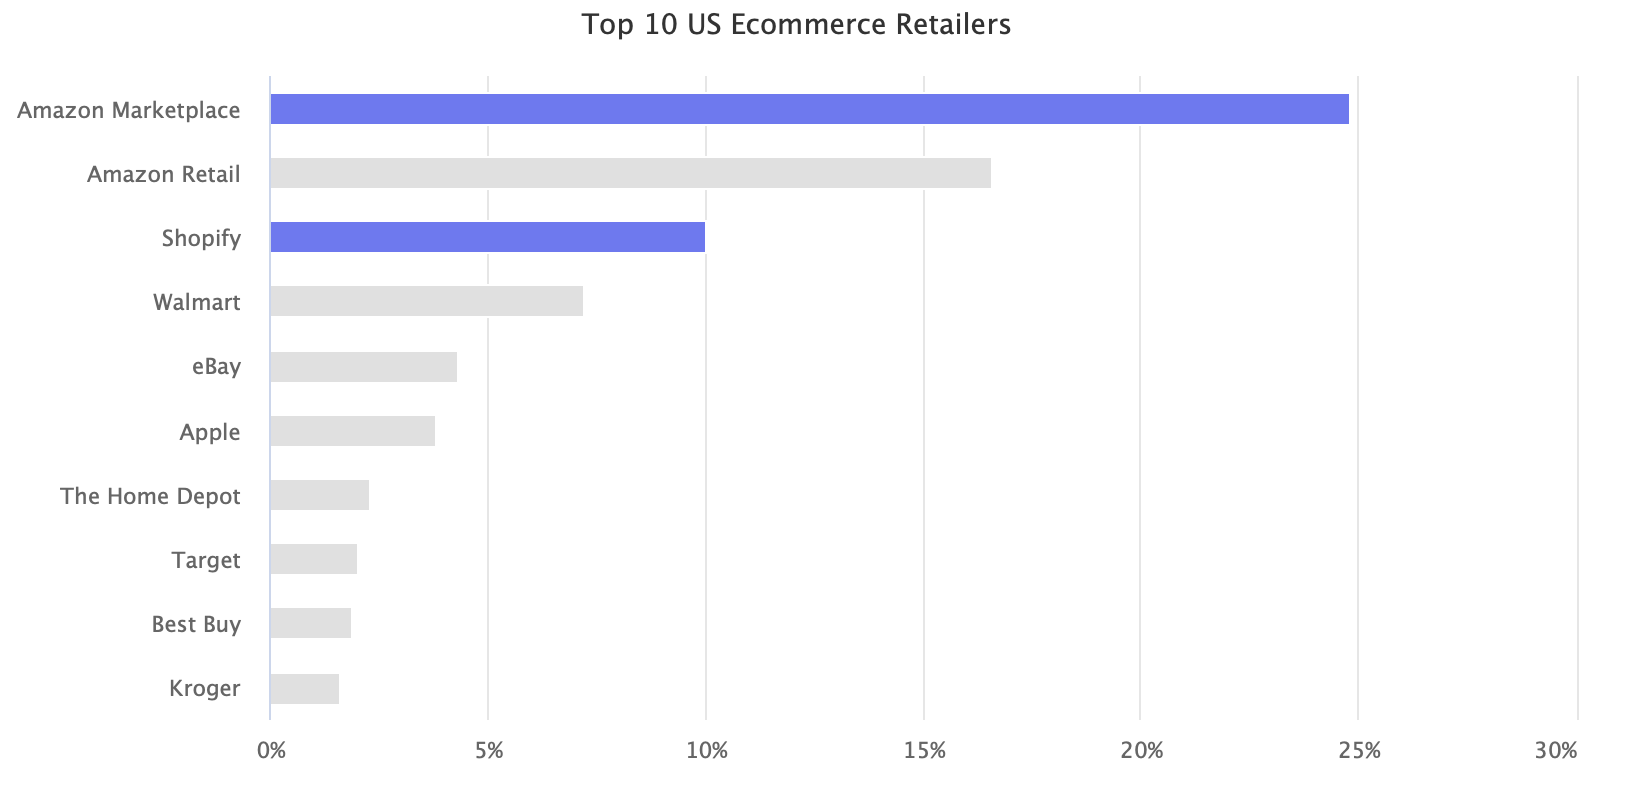 Top 10 US Ecommerce Retailers with Shopify